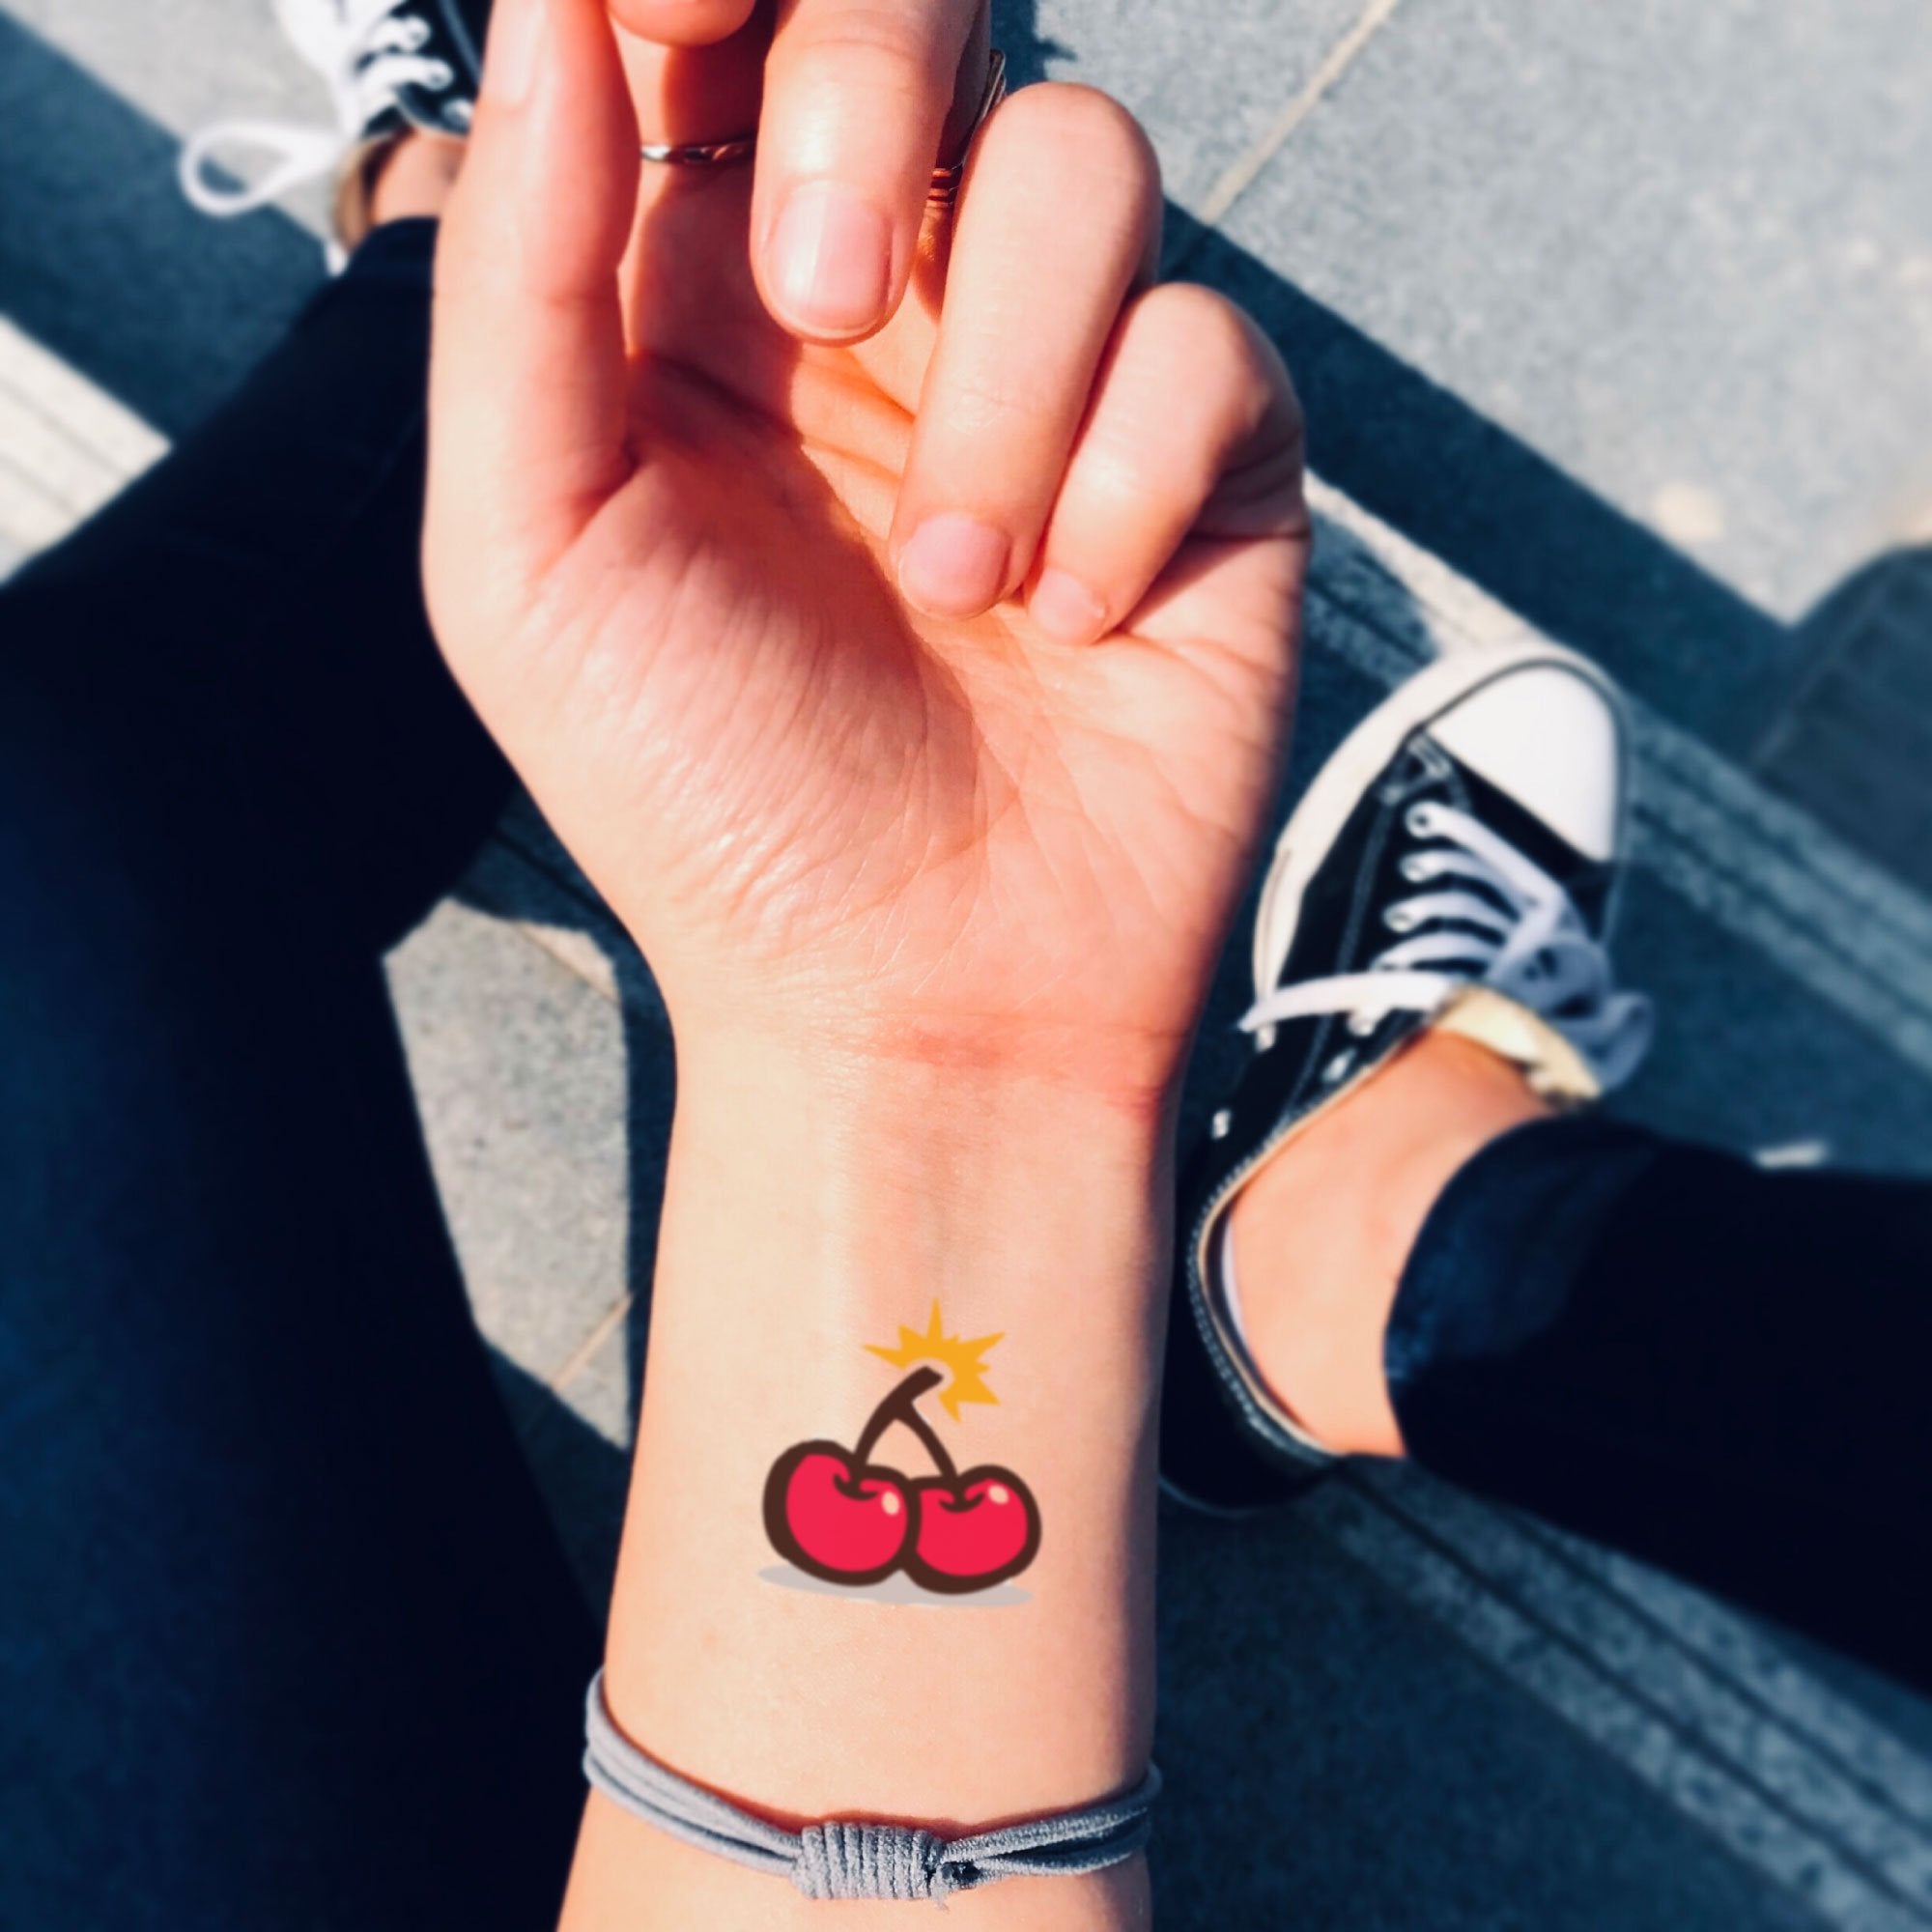 Buy Wholesale sticker bomb tattoo For Temporary Tattoos And Expression   Alibabacom